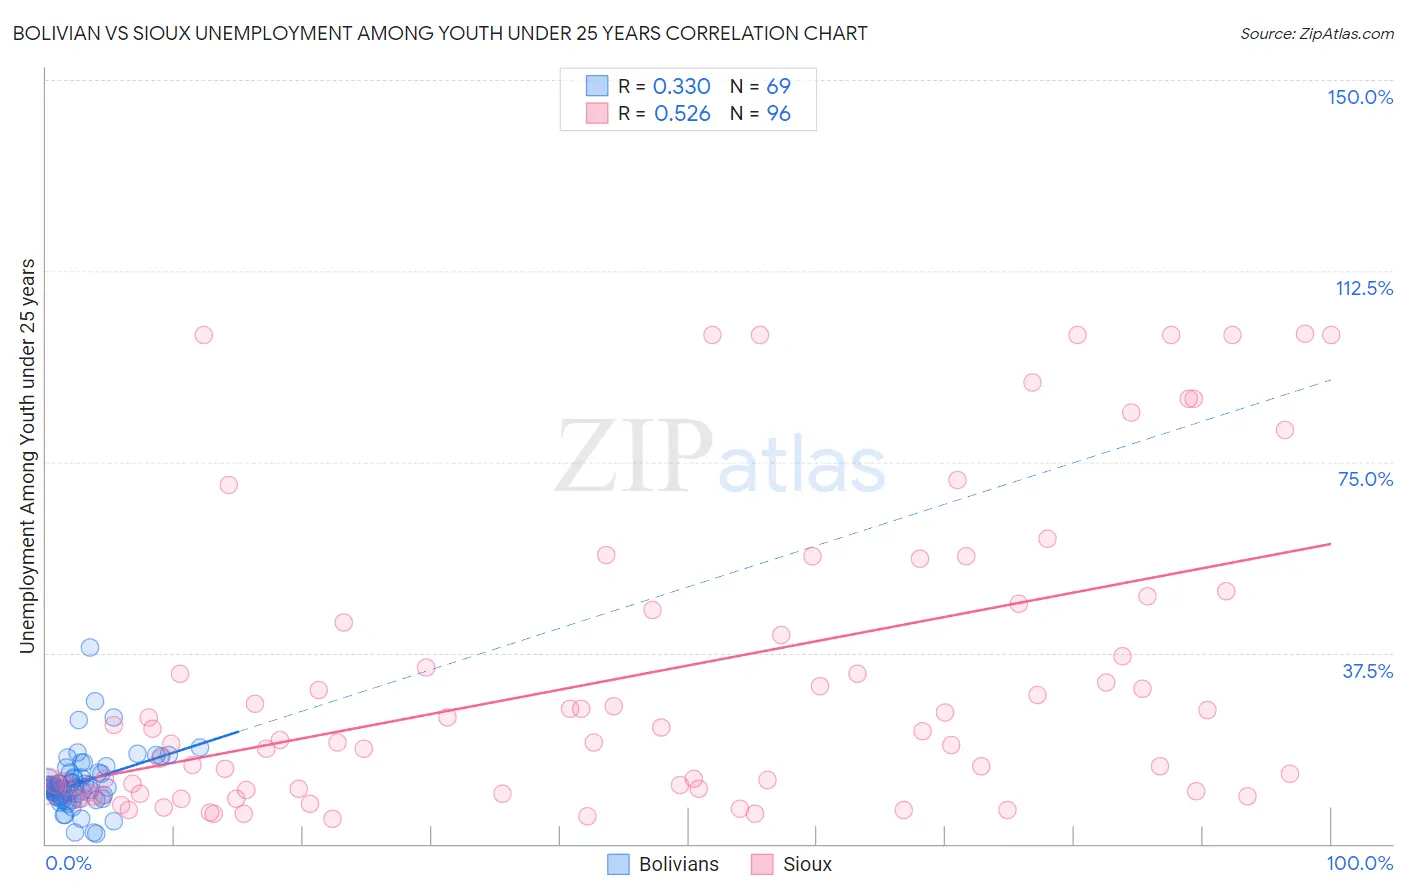 Bolivian vs Sioux Unemployment Among Youth under 25 years